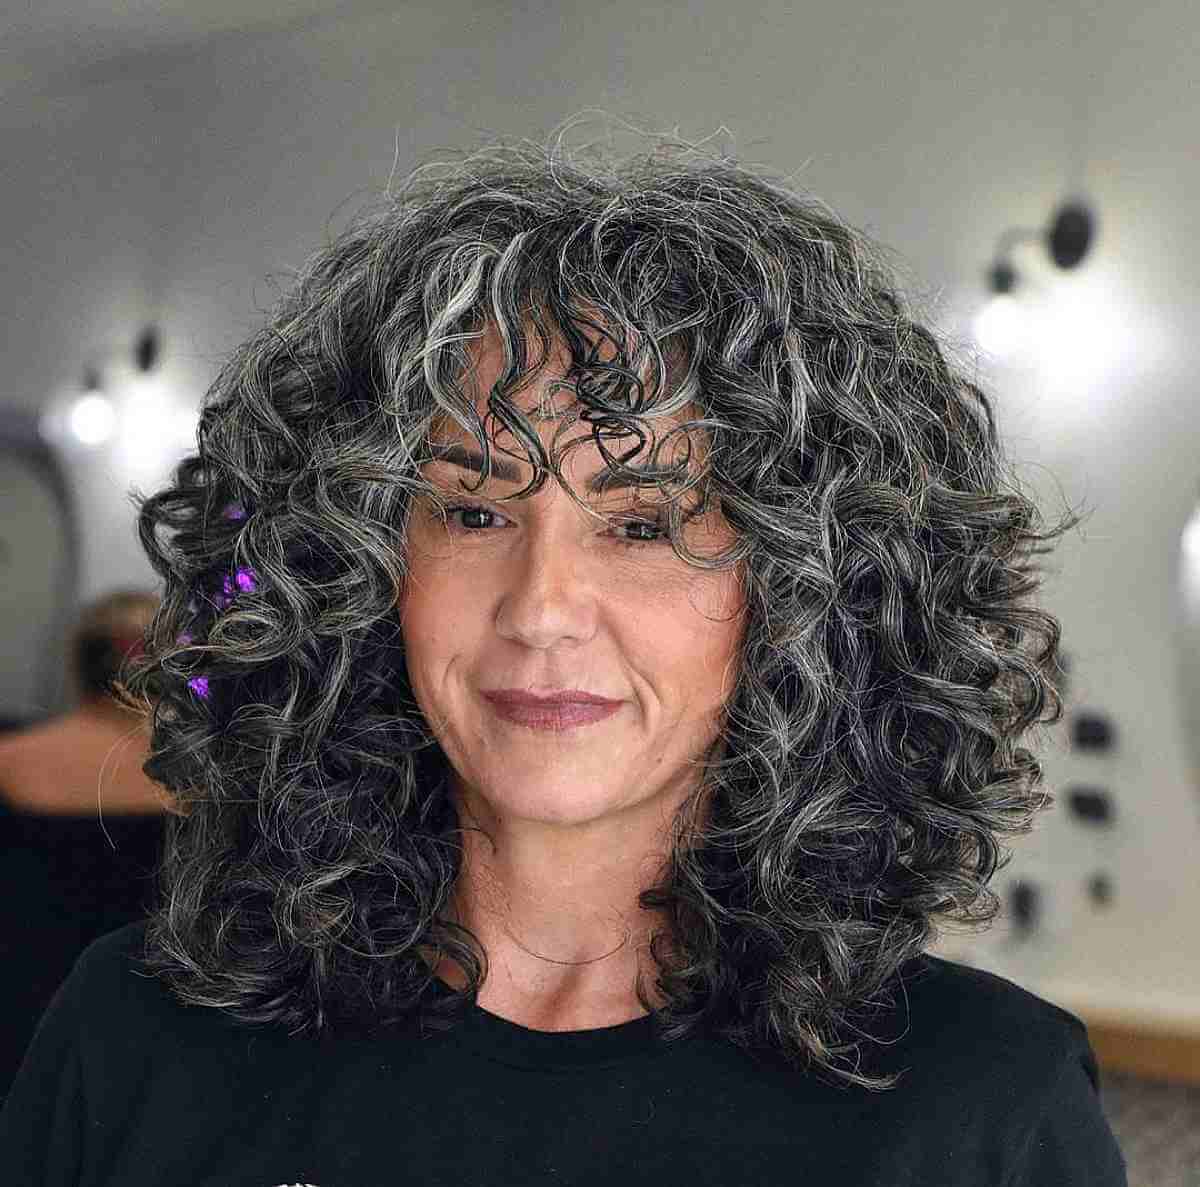 Medium-Length Salt-and-Pepper Curly Bob with Curly Bangs for Ladies 60 and Up